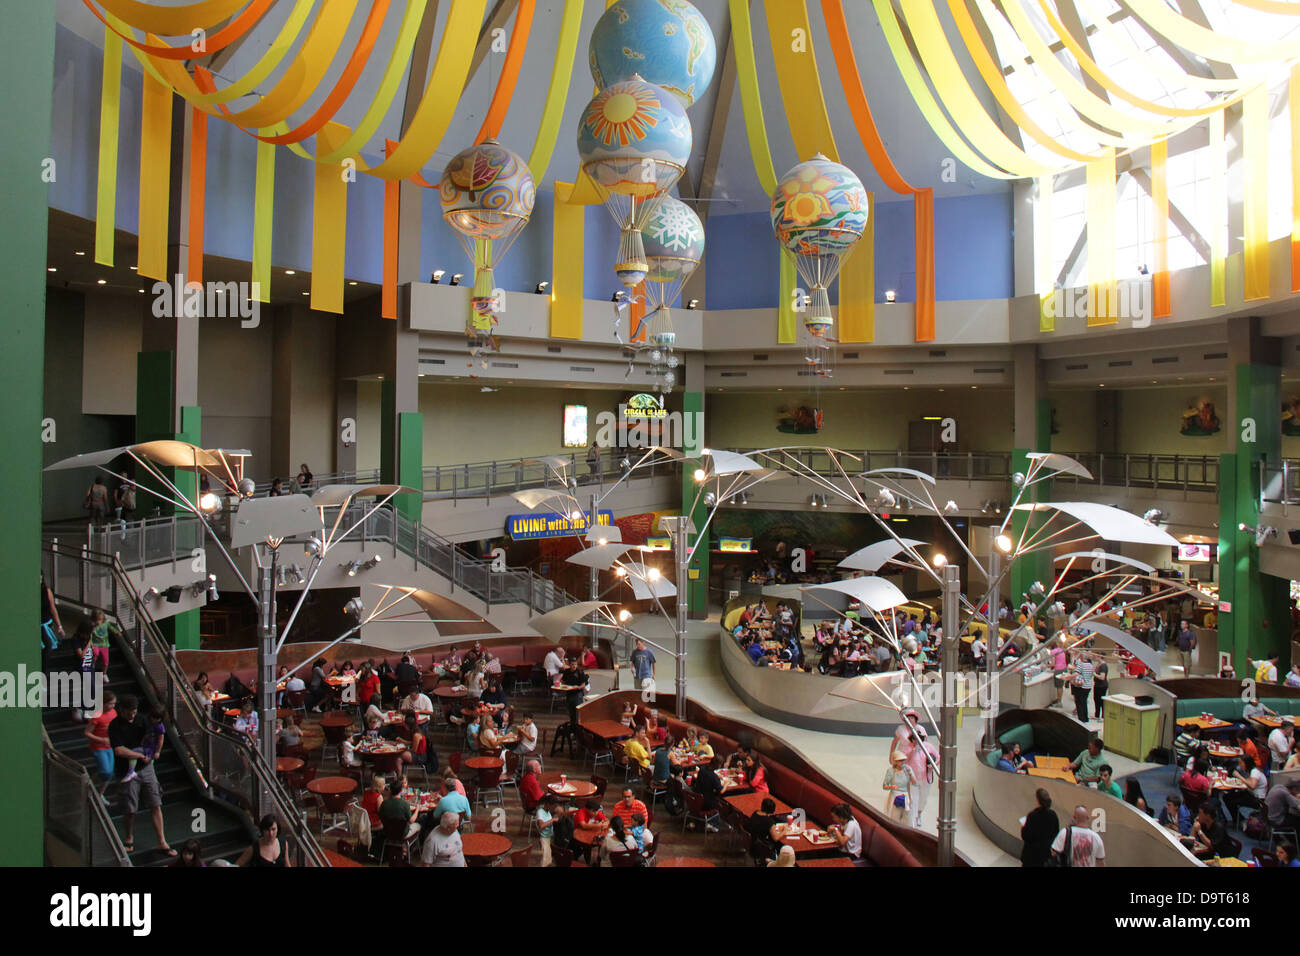 Food court at The Land attraction at Epcot Center, Disney World, Orlando, Florida. Stock Photo